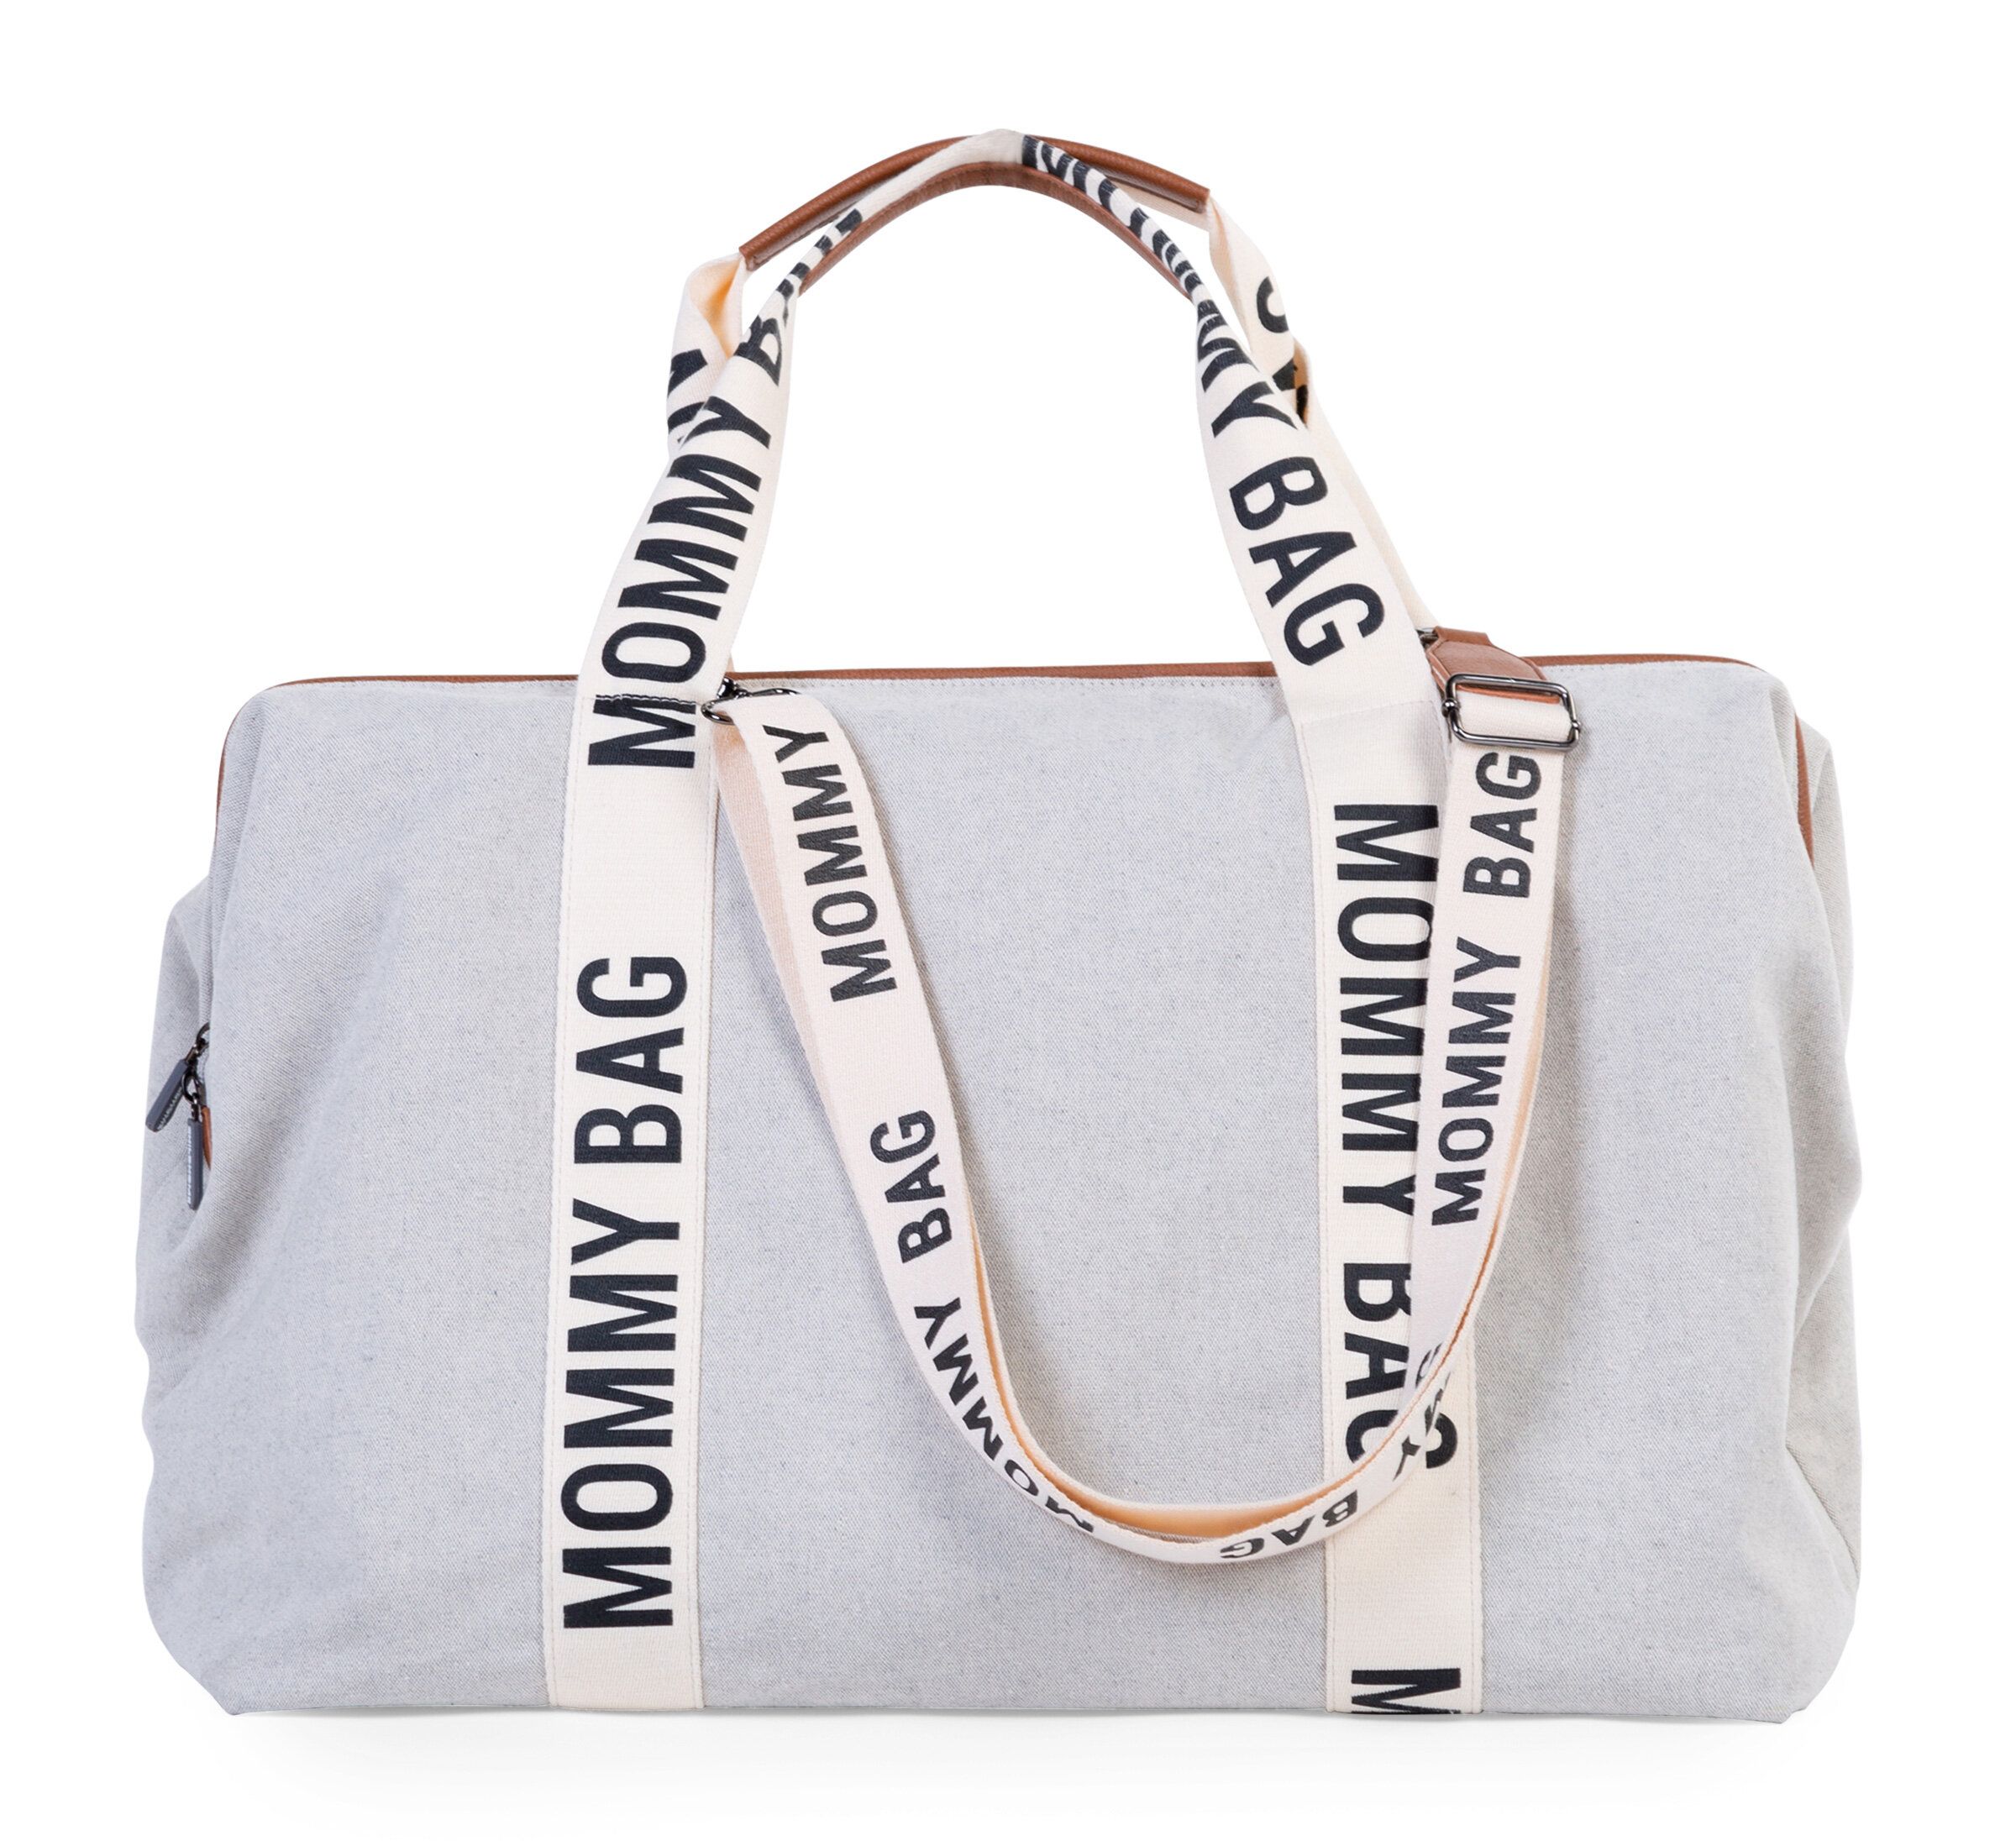 BOLSO MOMMY BAG SIGNATURE CANVAS OFF WHITE